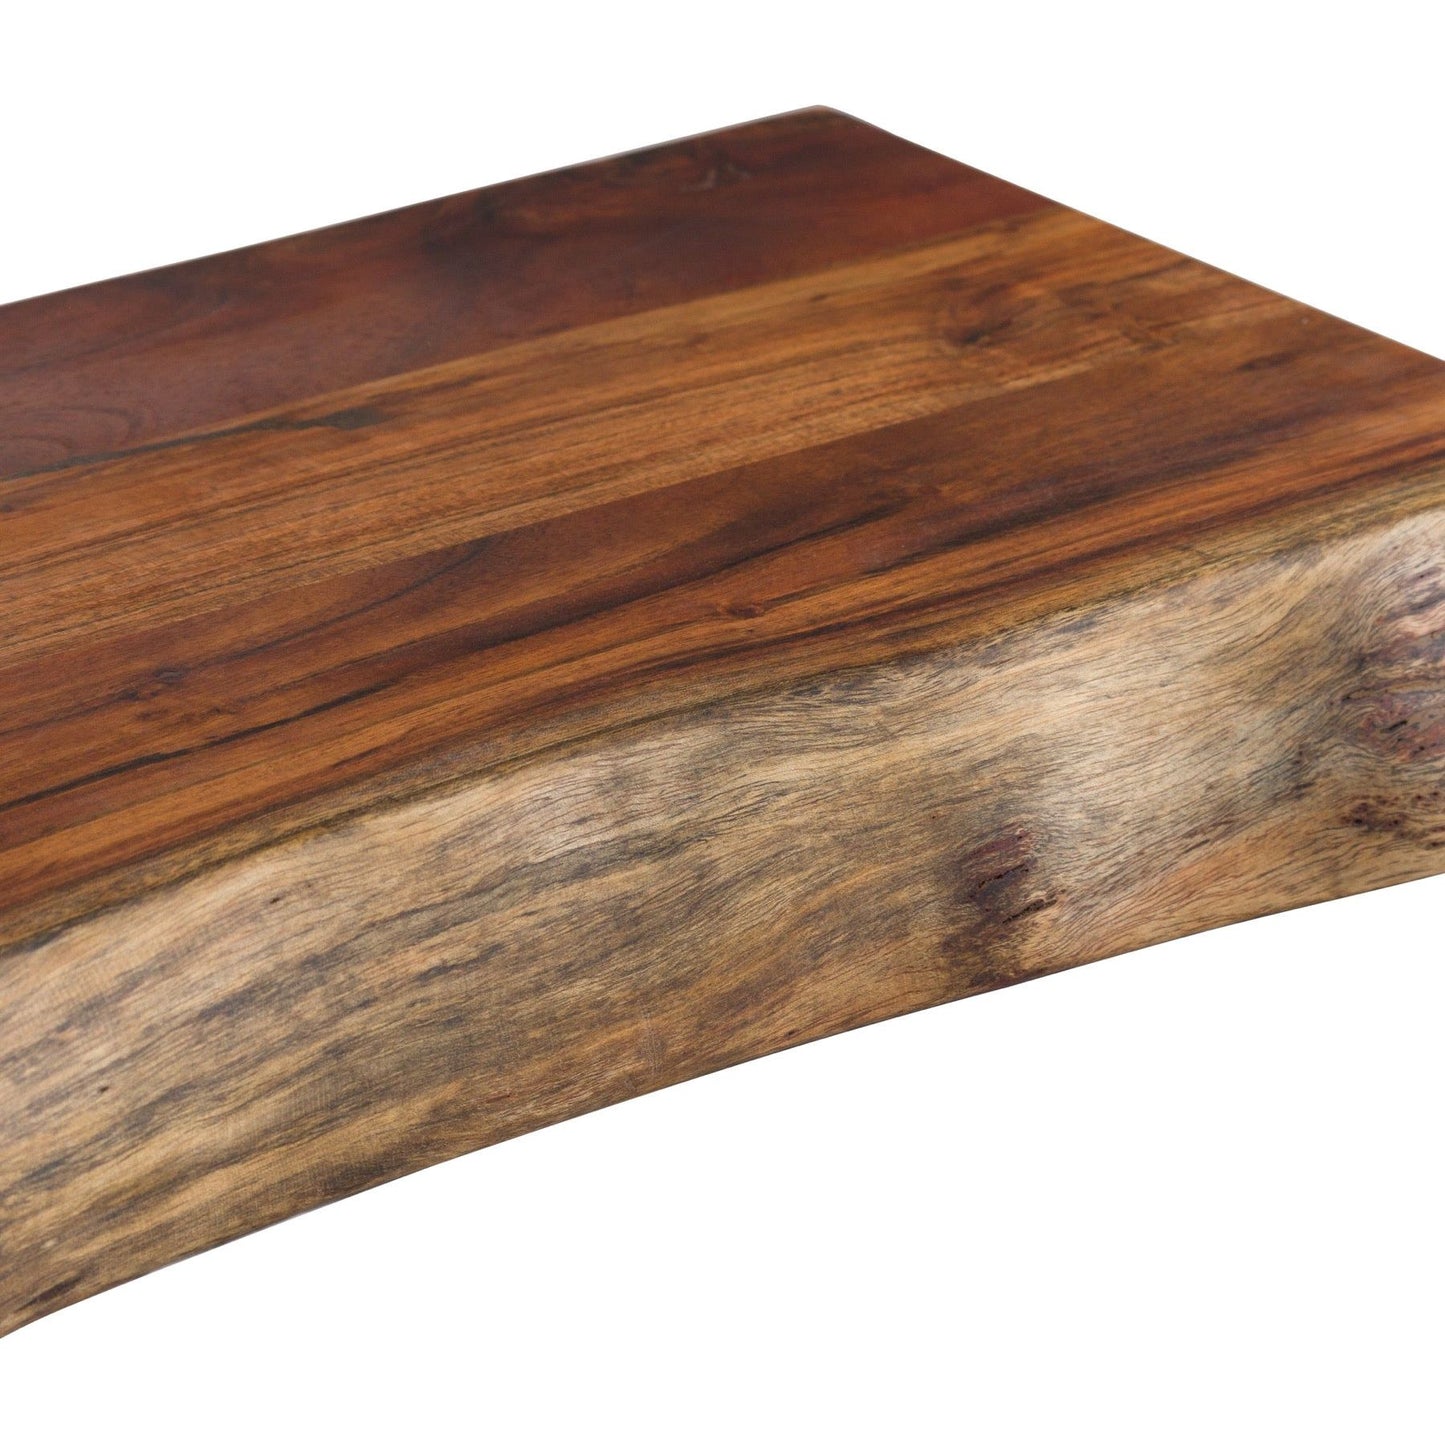 Live Edge Collection Large Pyman Chopping Board - Ashton and Finch